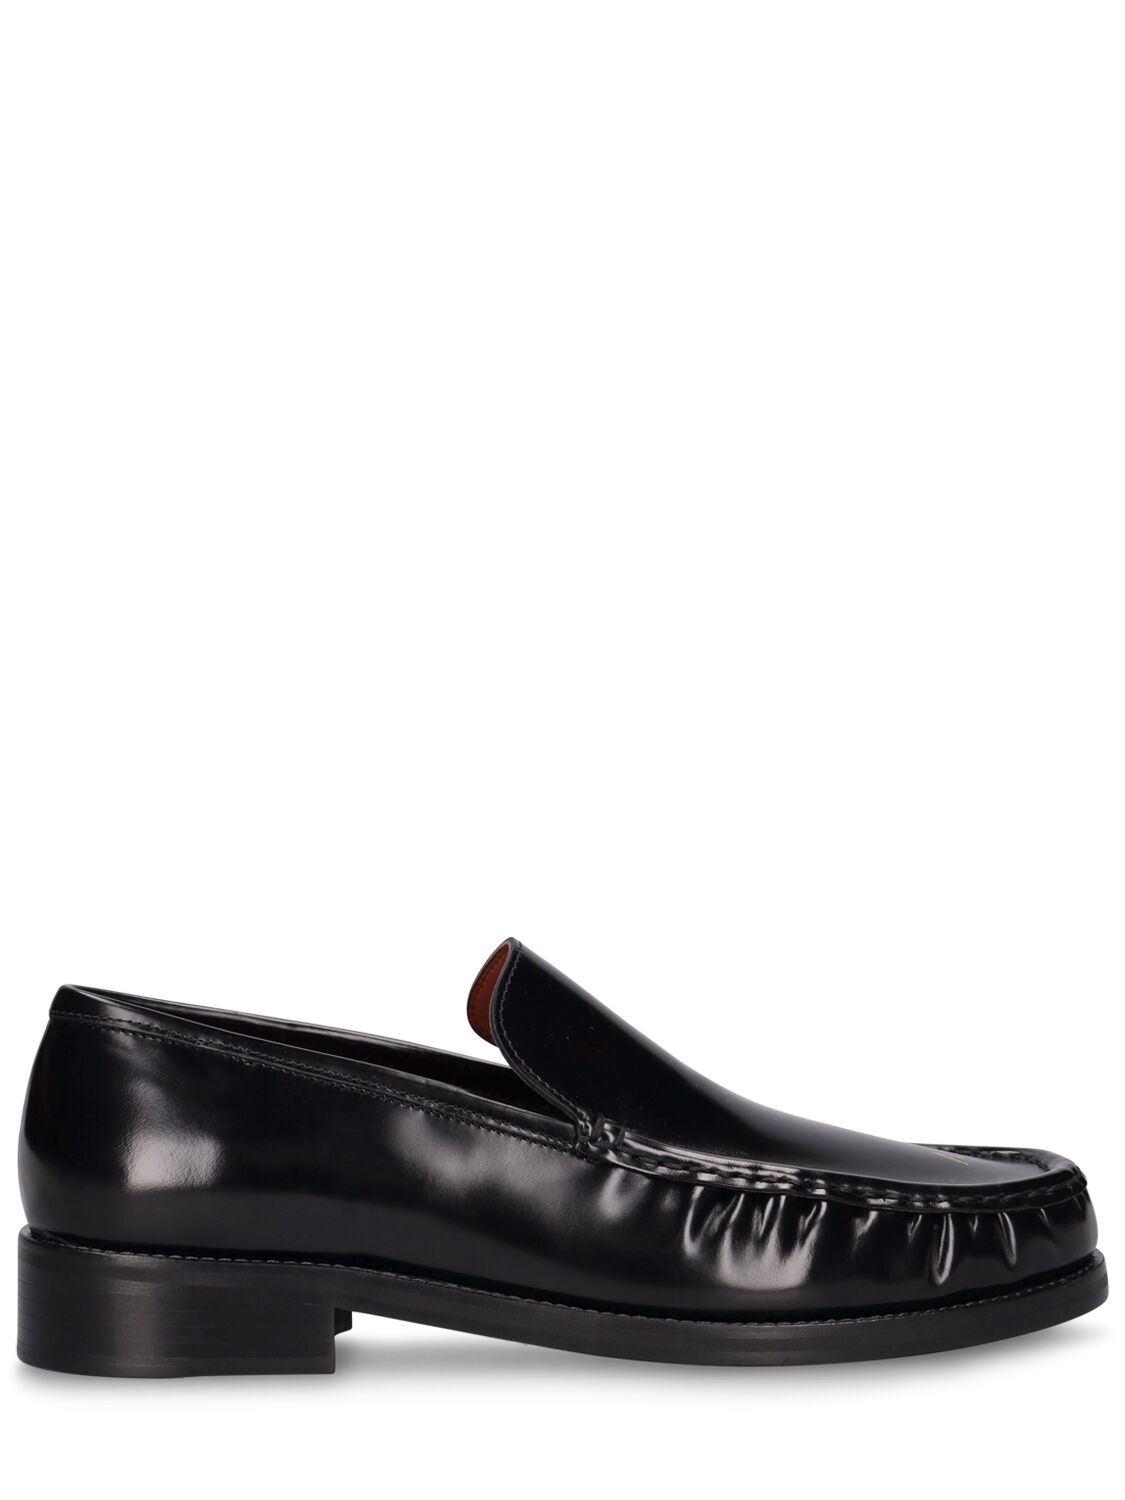 Acne Studios Embellished Leather Loafers In Black